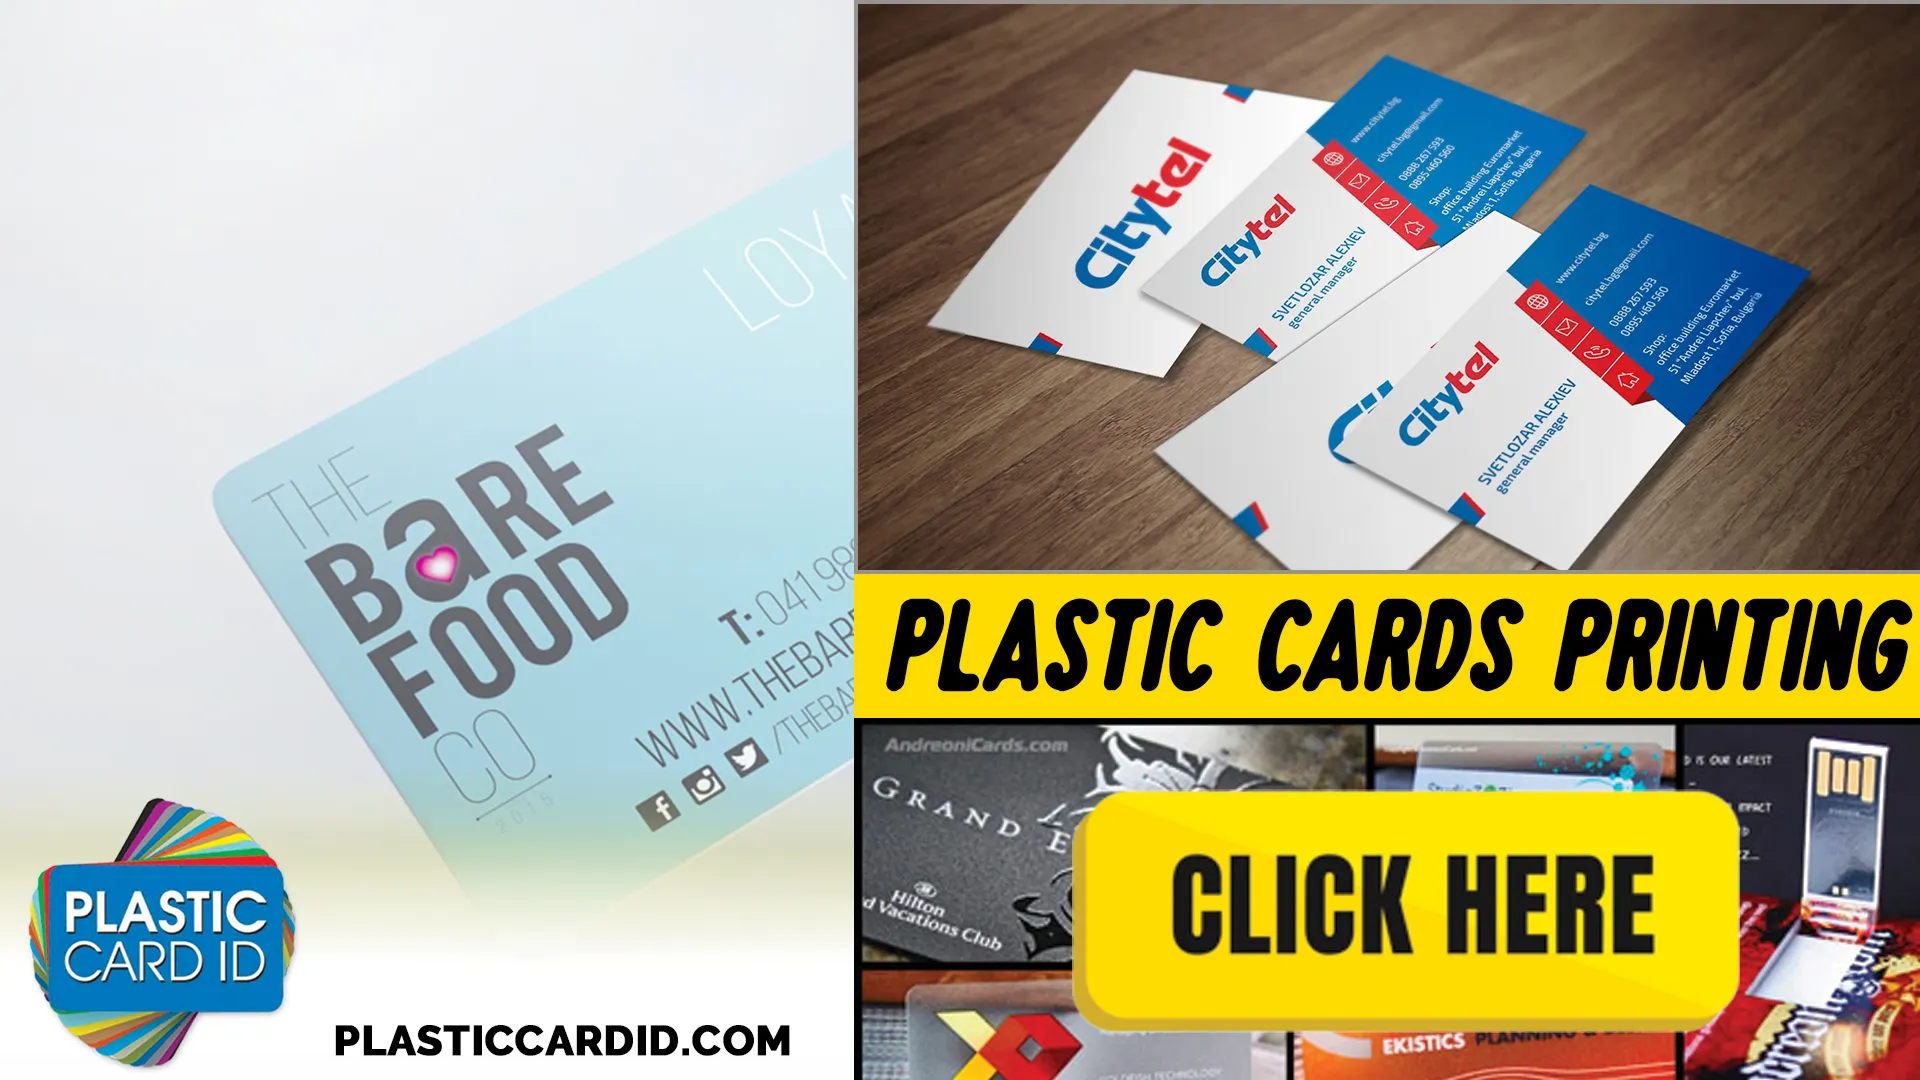 Join the Green Revolution with Plastic Card ID
